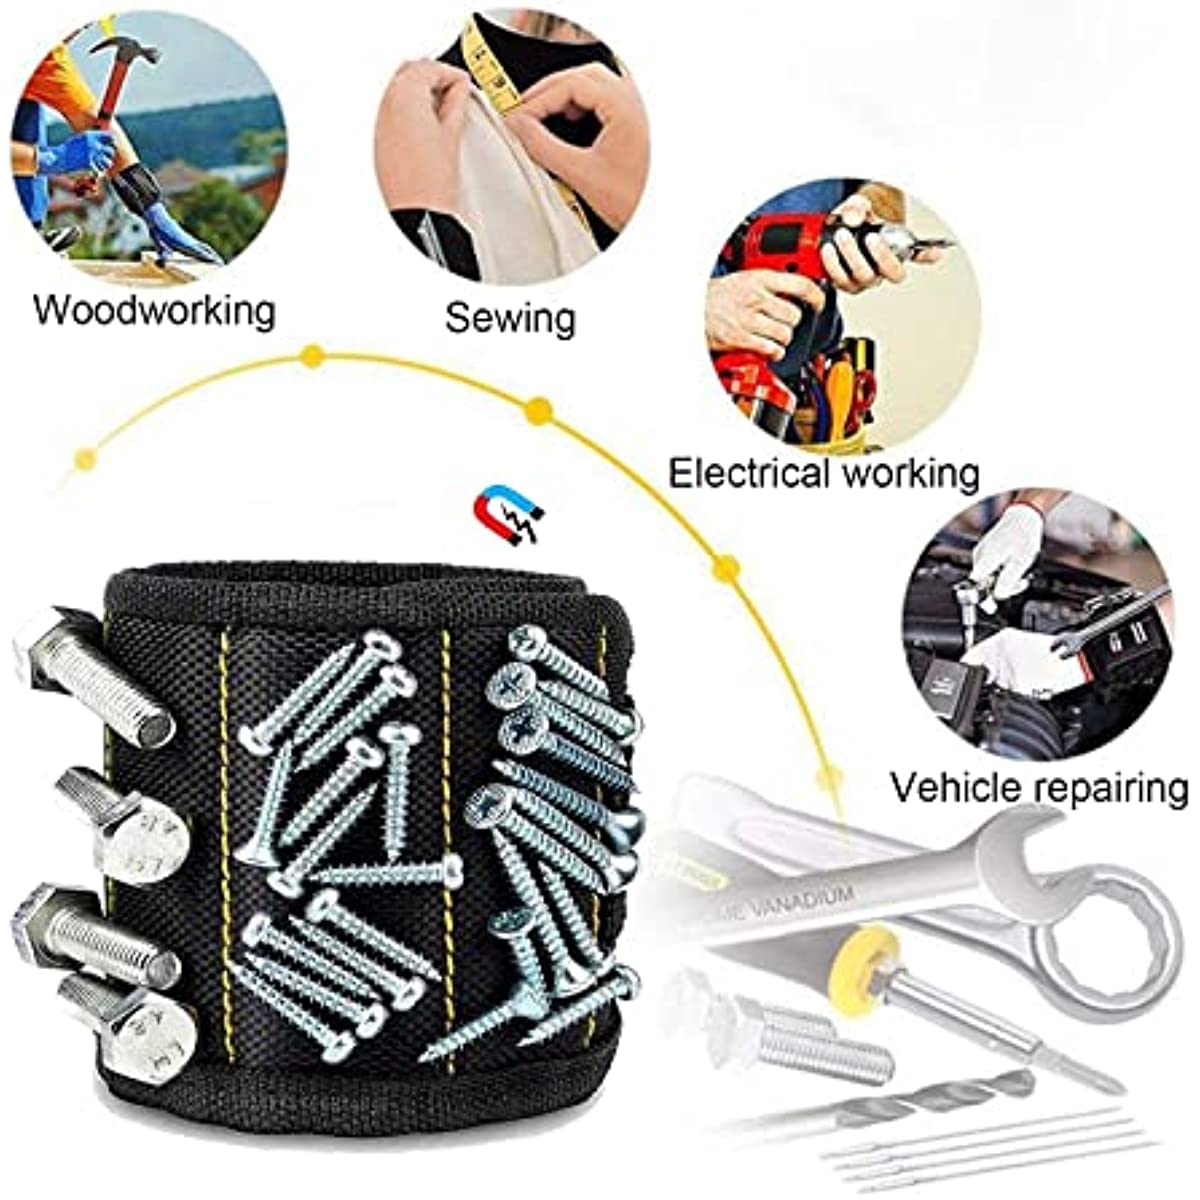 Magnetic Wristband with 10 Super Strong Magnets for Holding Screws, Nails,  Drill Bits, Magnetic Wrist Band Tool Holder, Tool Gifts for DIY Handyman